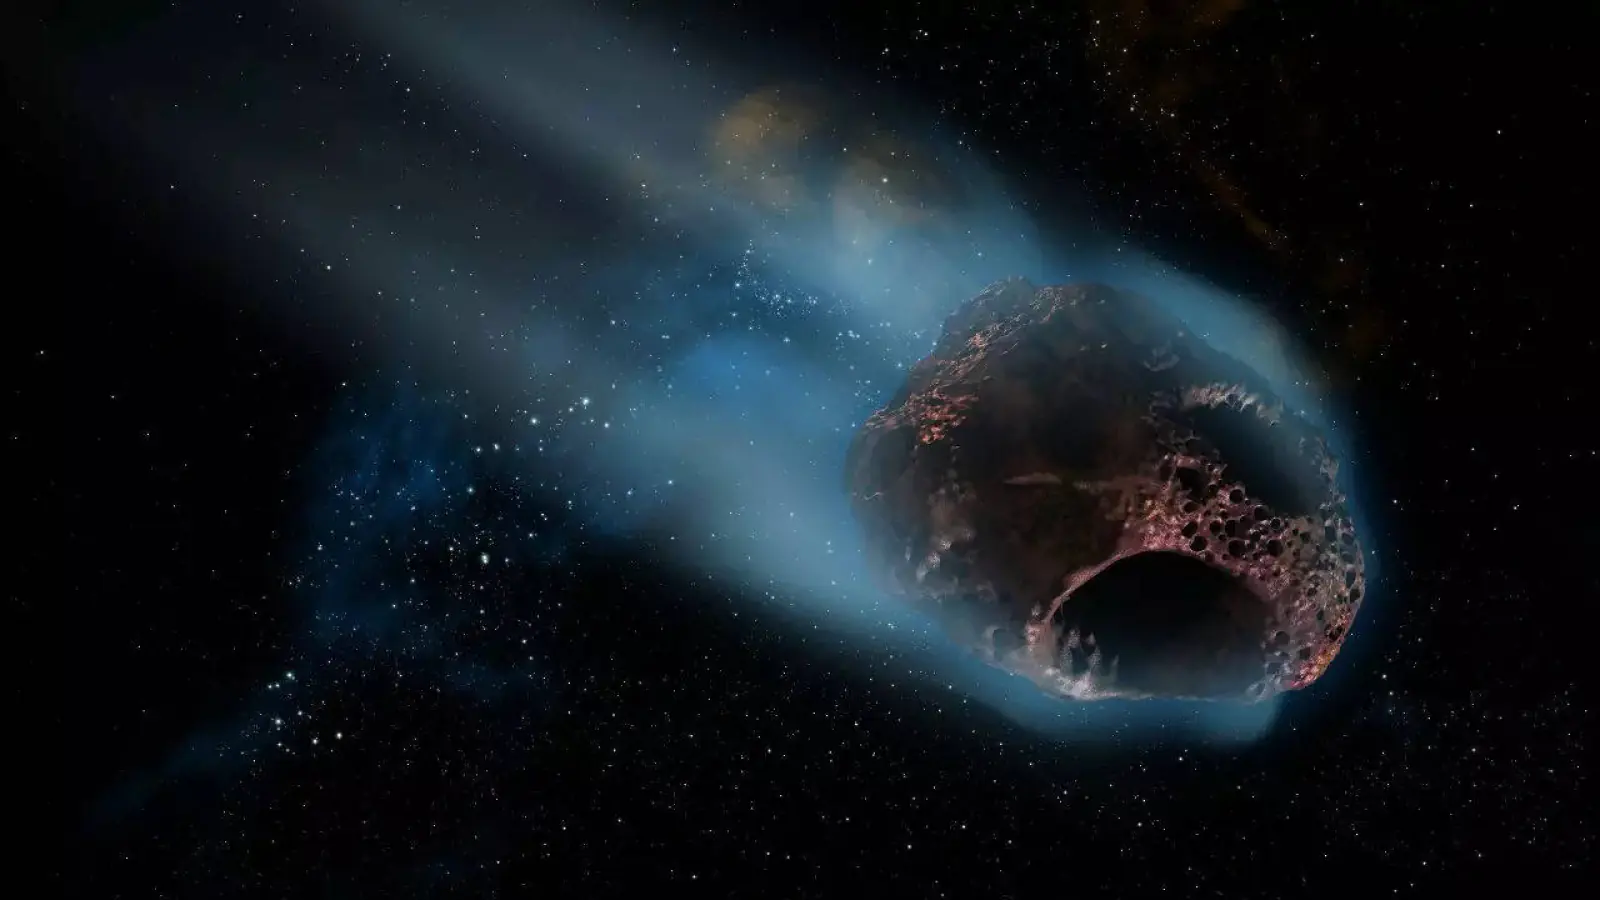 Bus-sized asteroid moving towards Earth at a speed of 14400 km per hour, NASA alerted